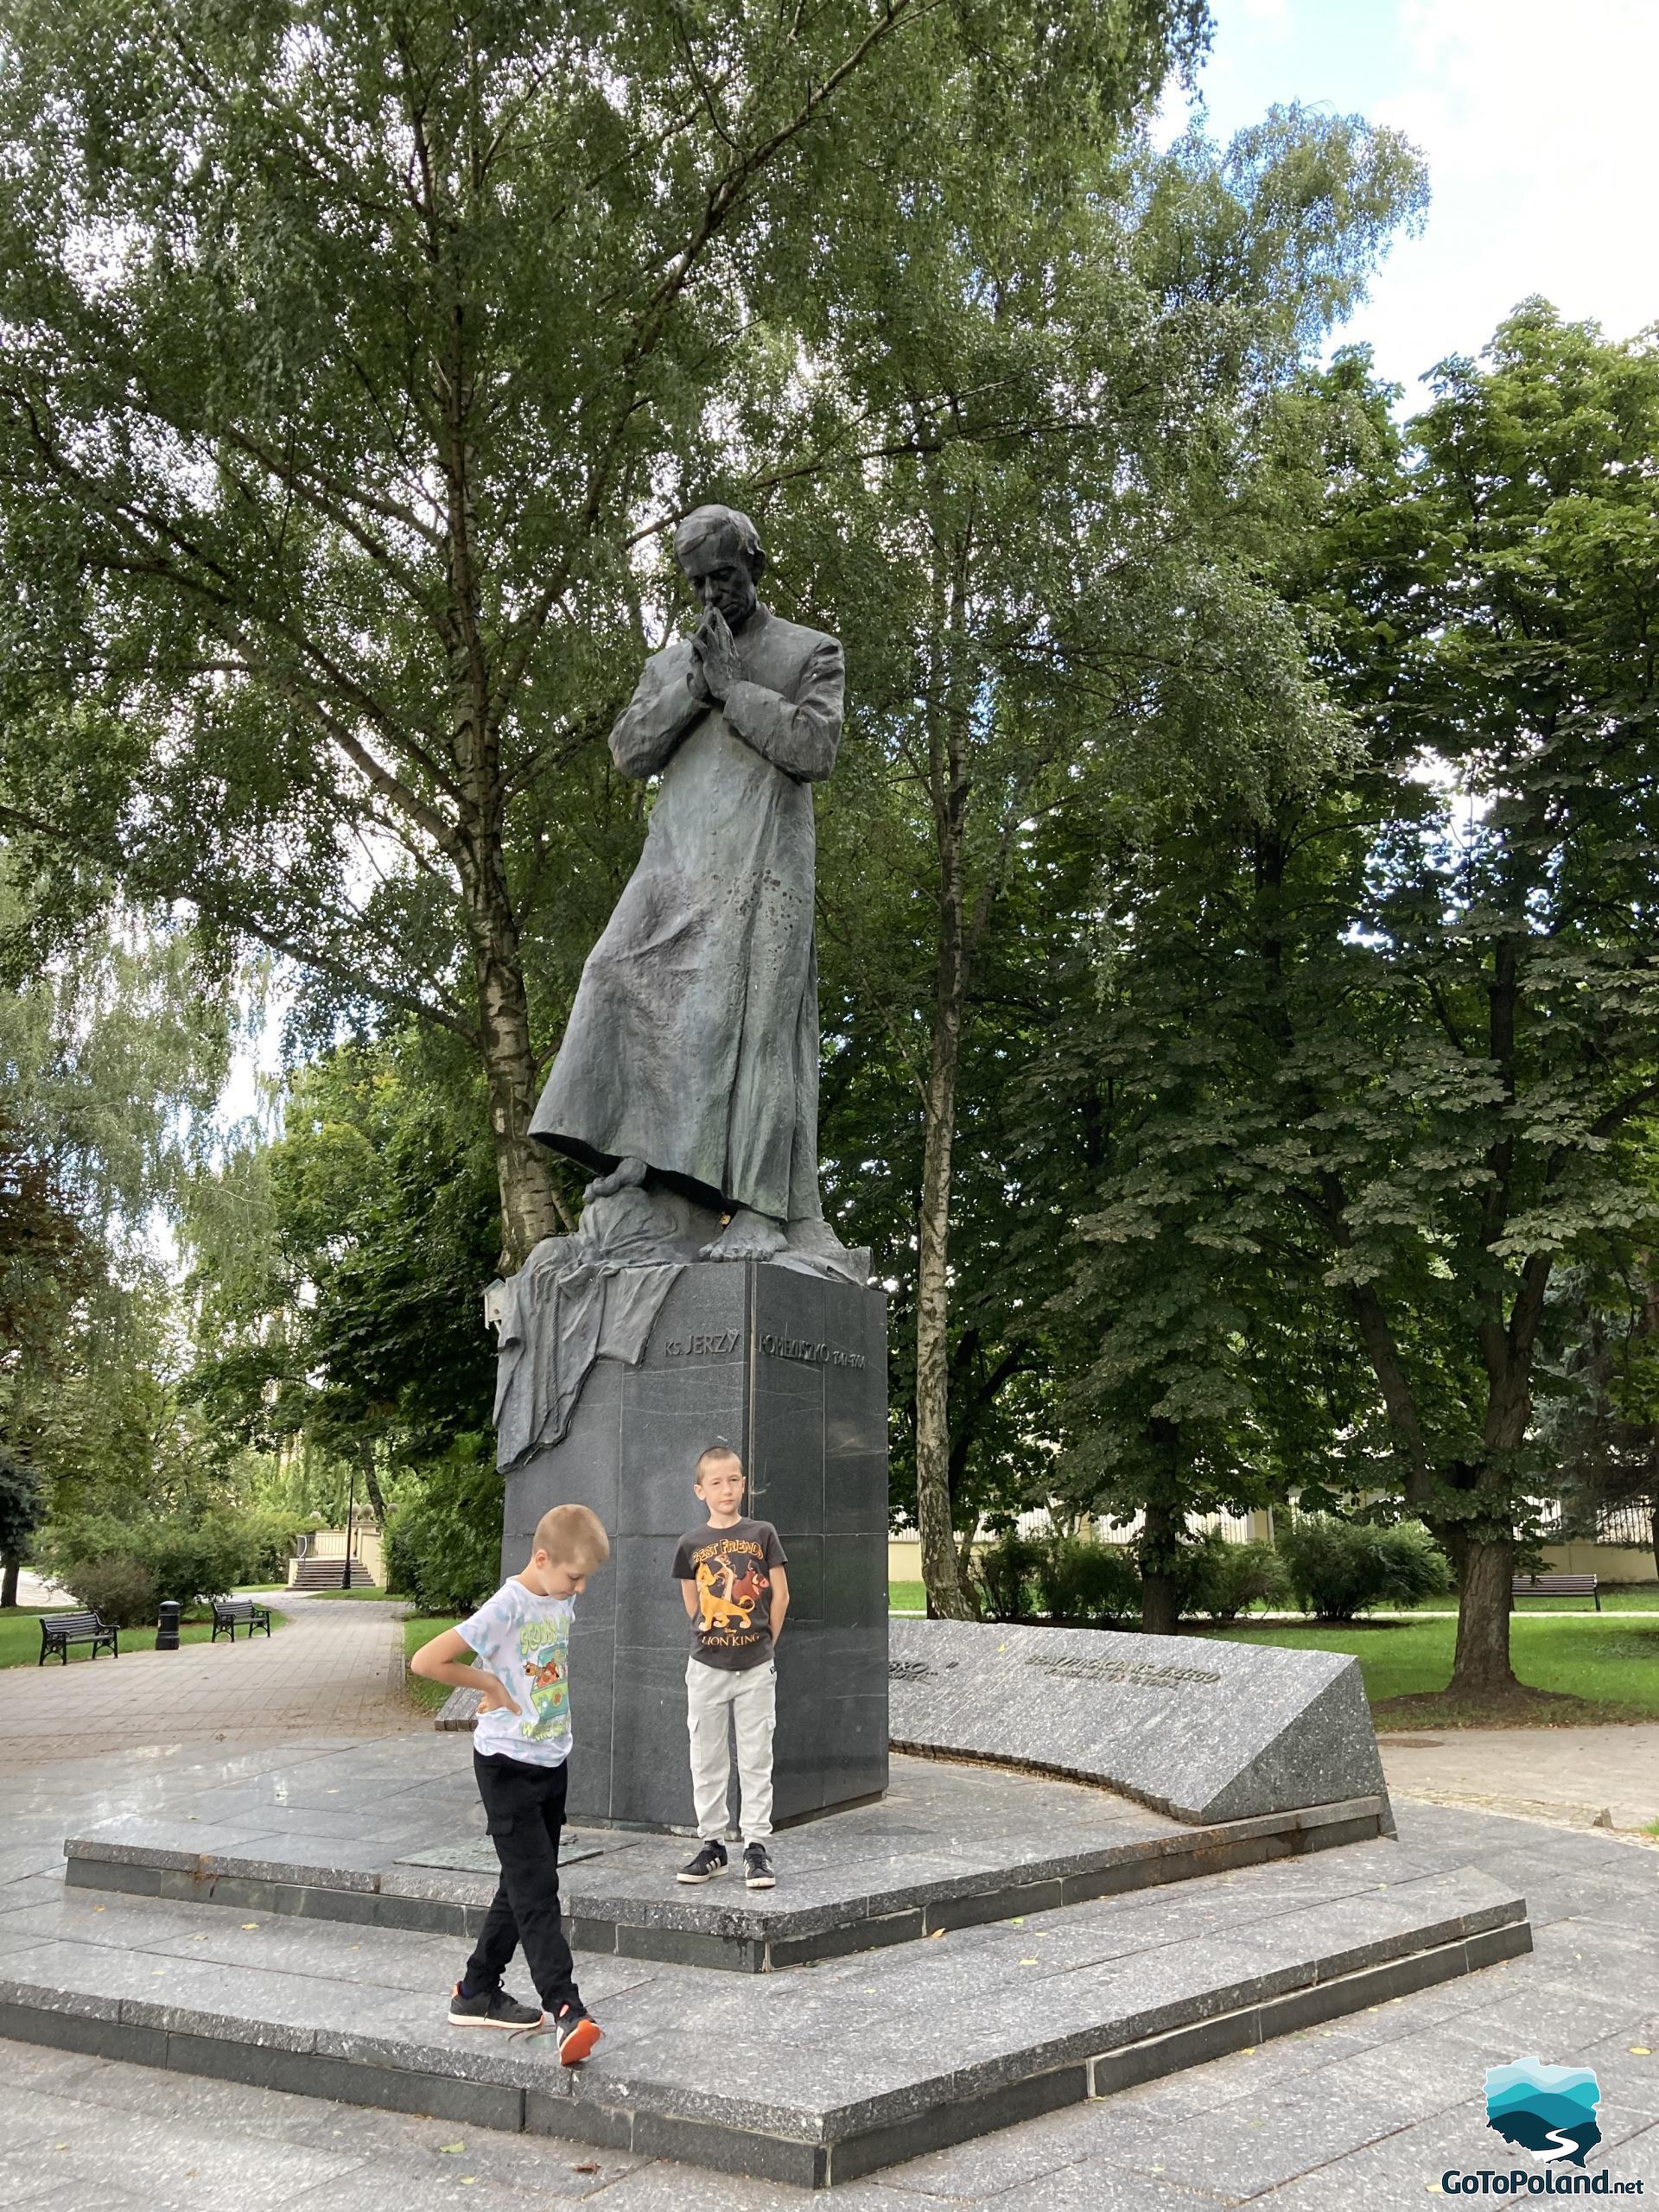 a statue of priest Jerzy Popieluszko on a pedestal, two boys are by the statue